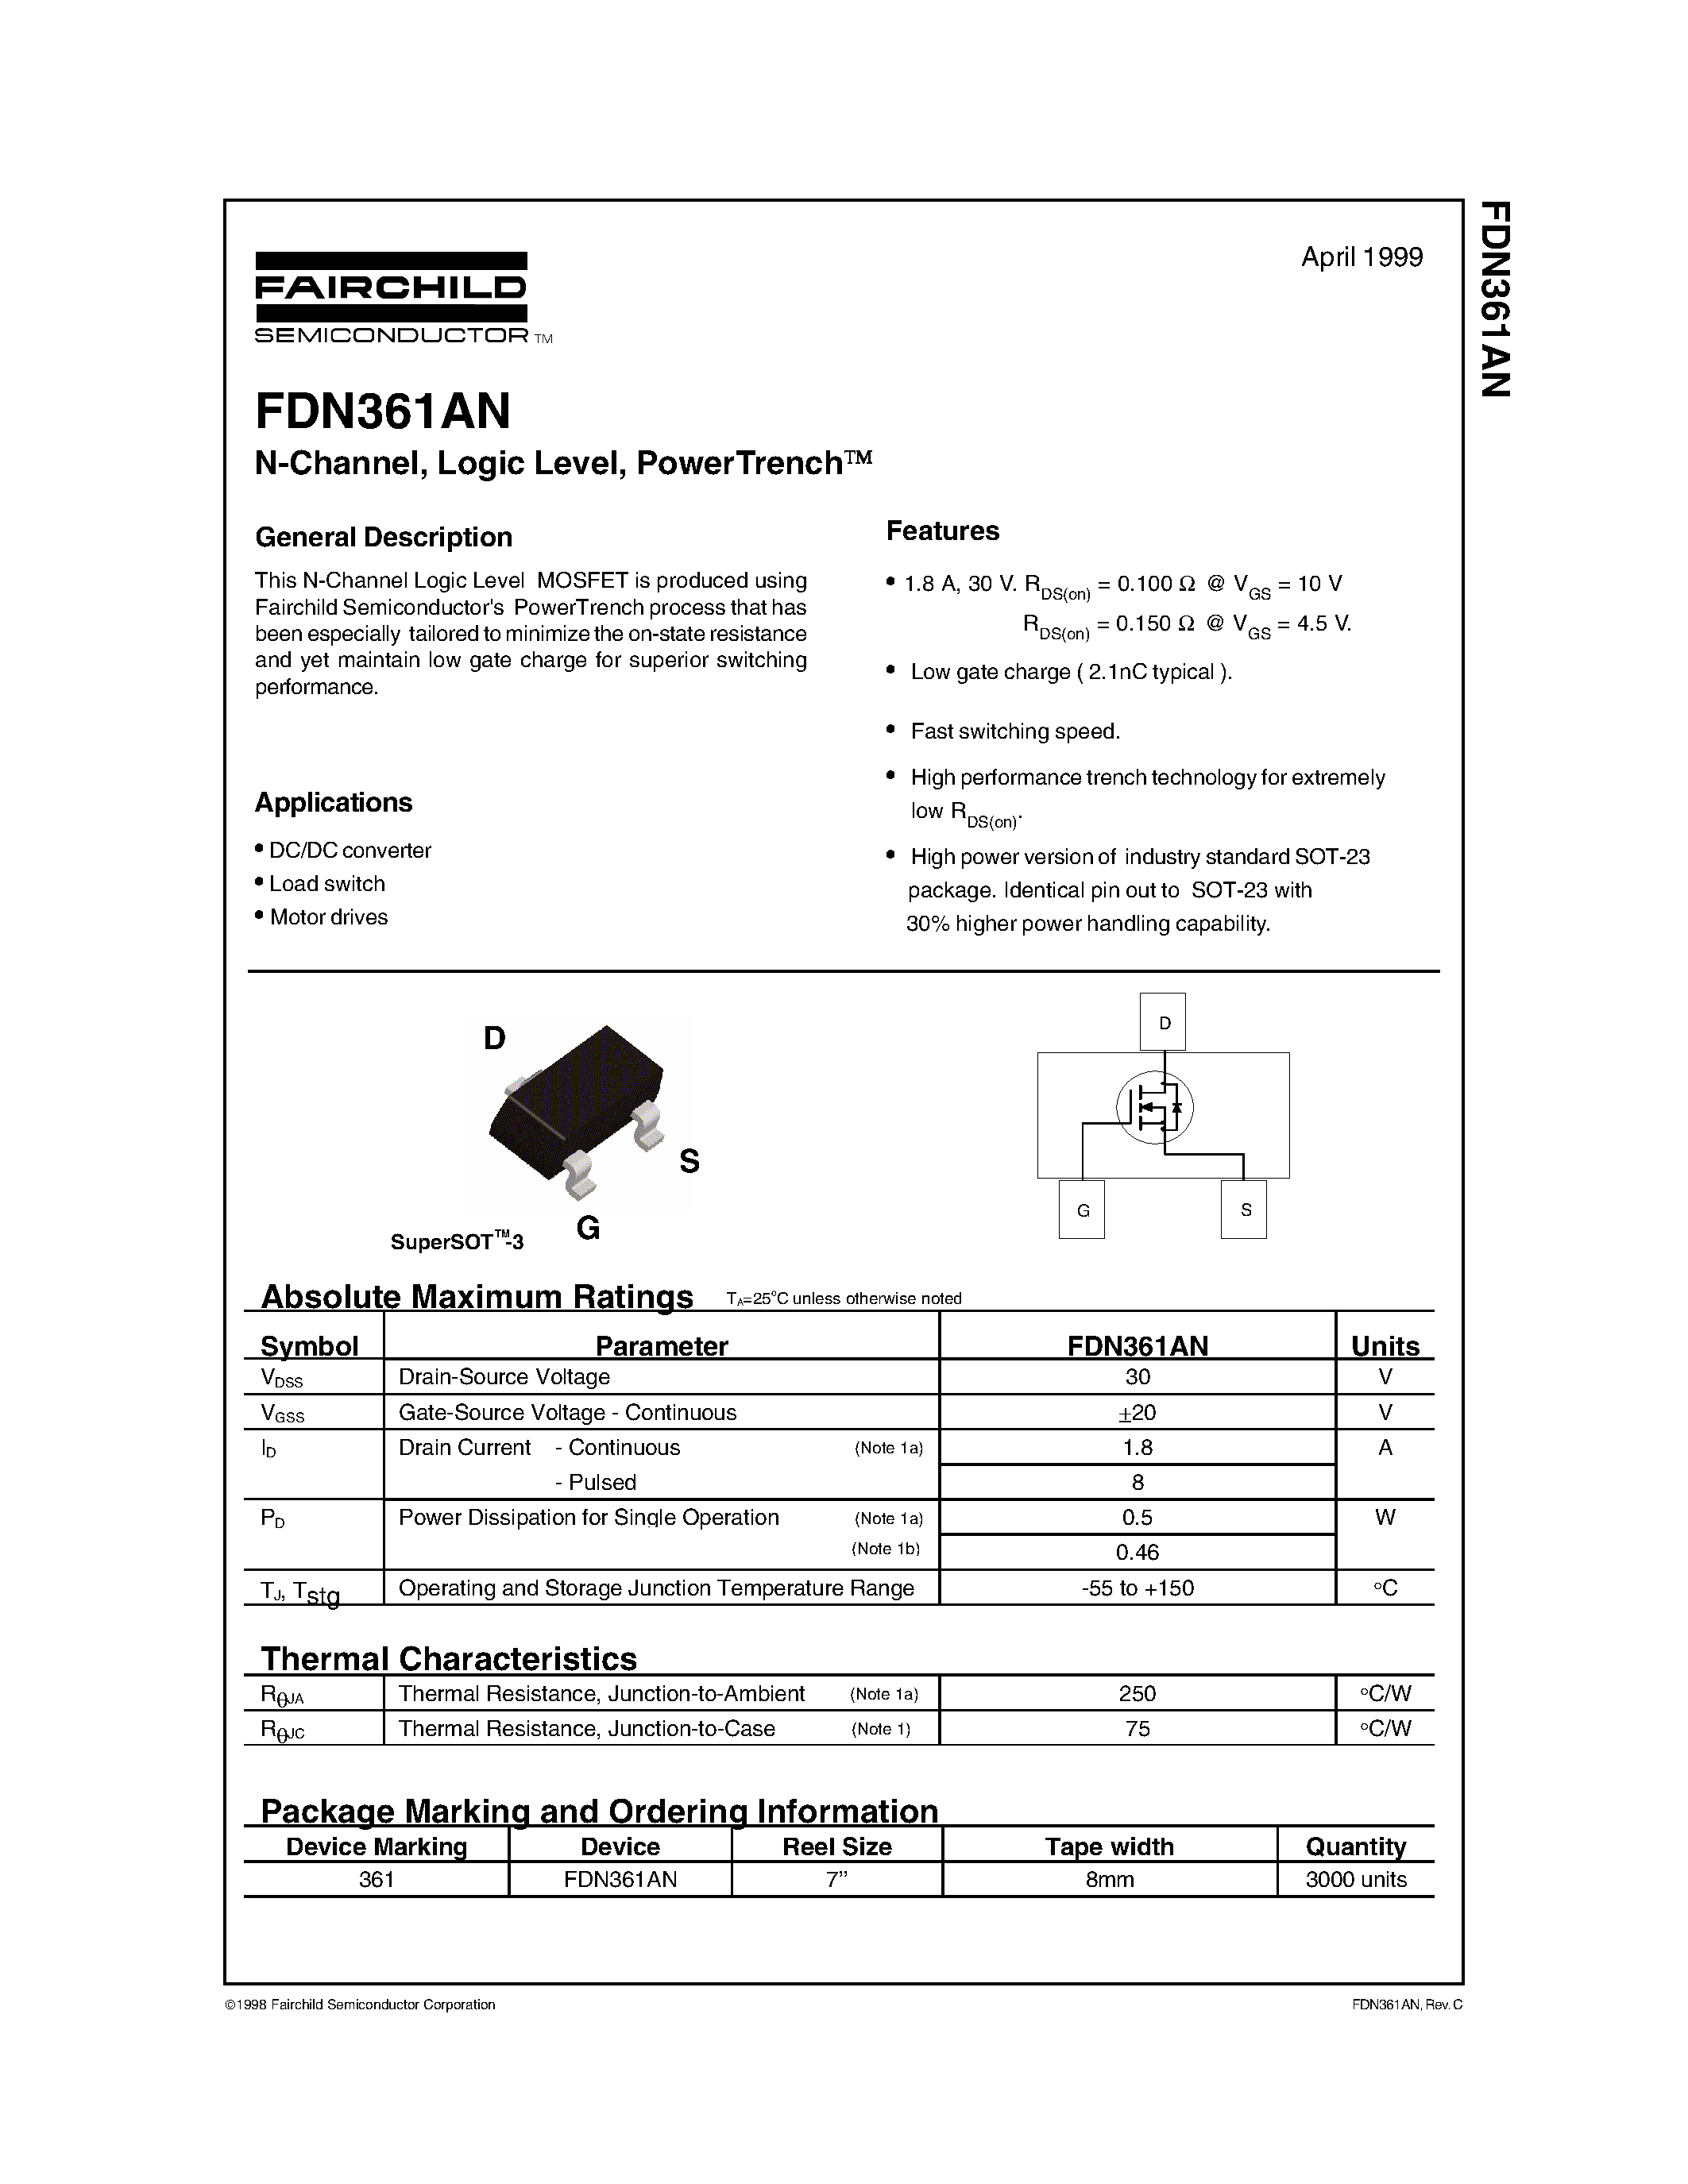 Datasheet FDN361 - N-Channel/ Logic Level/ PowerTrench page 1